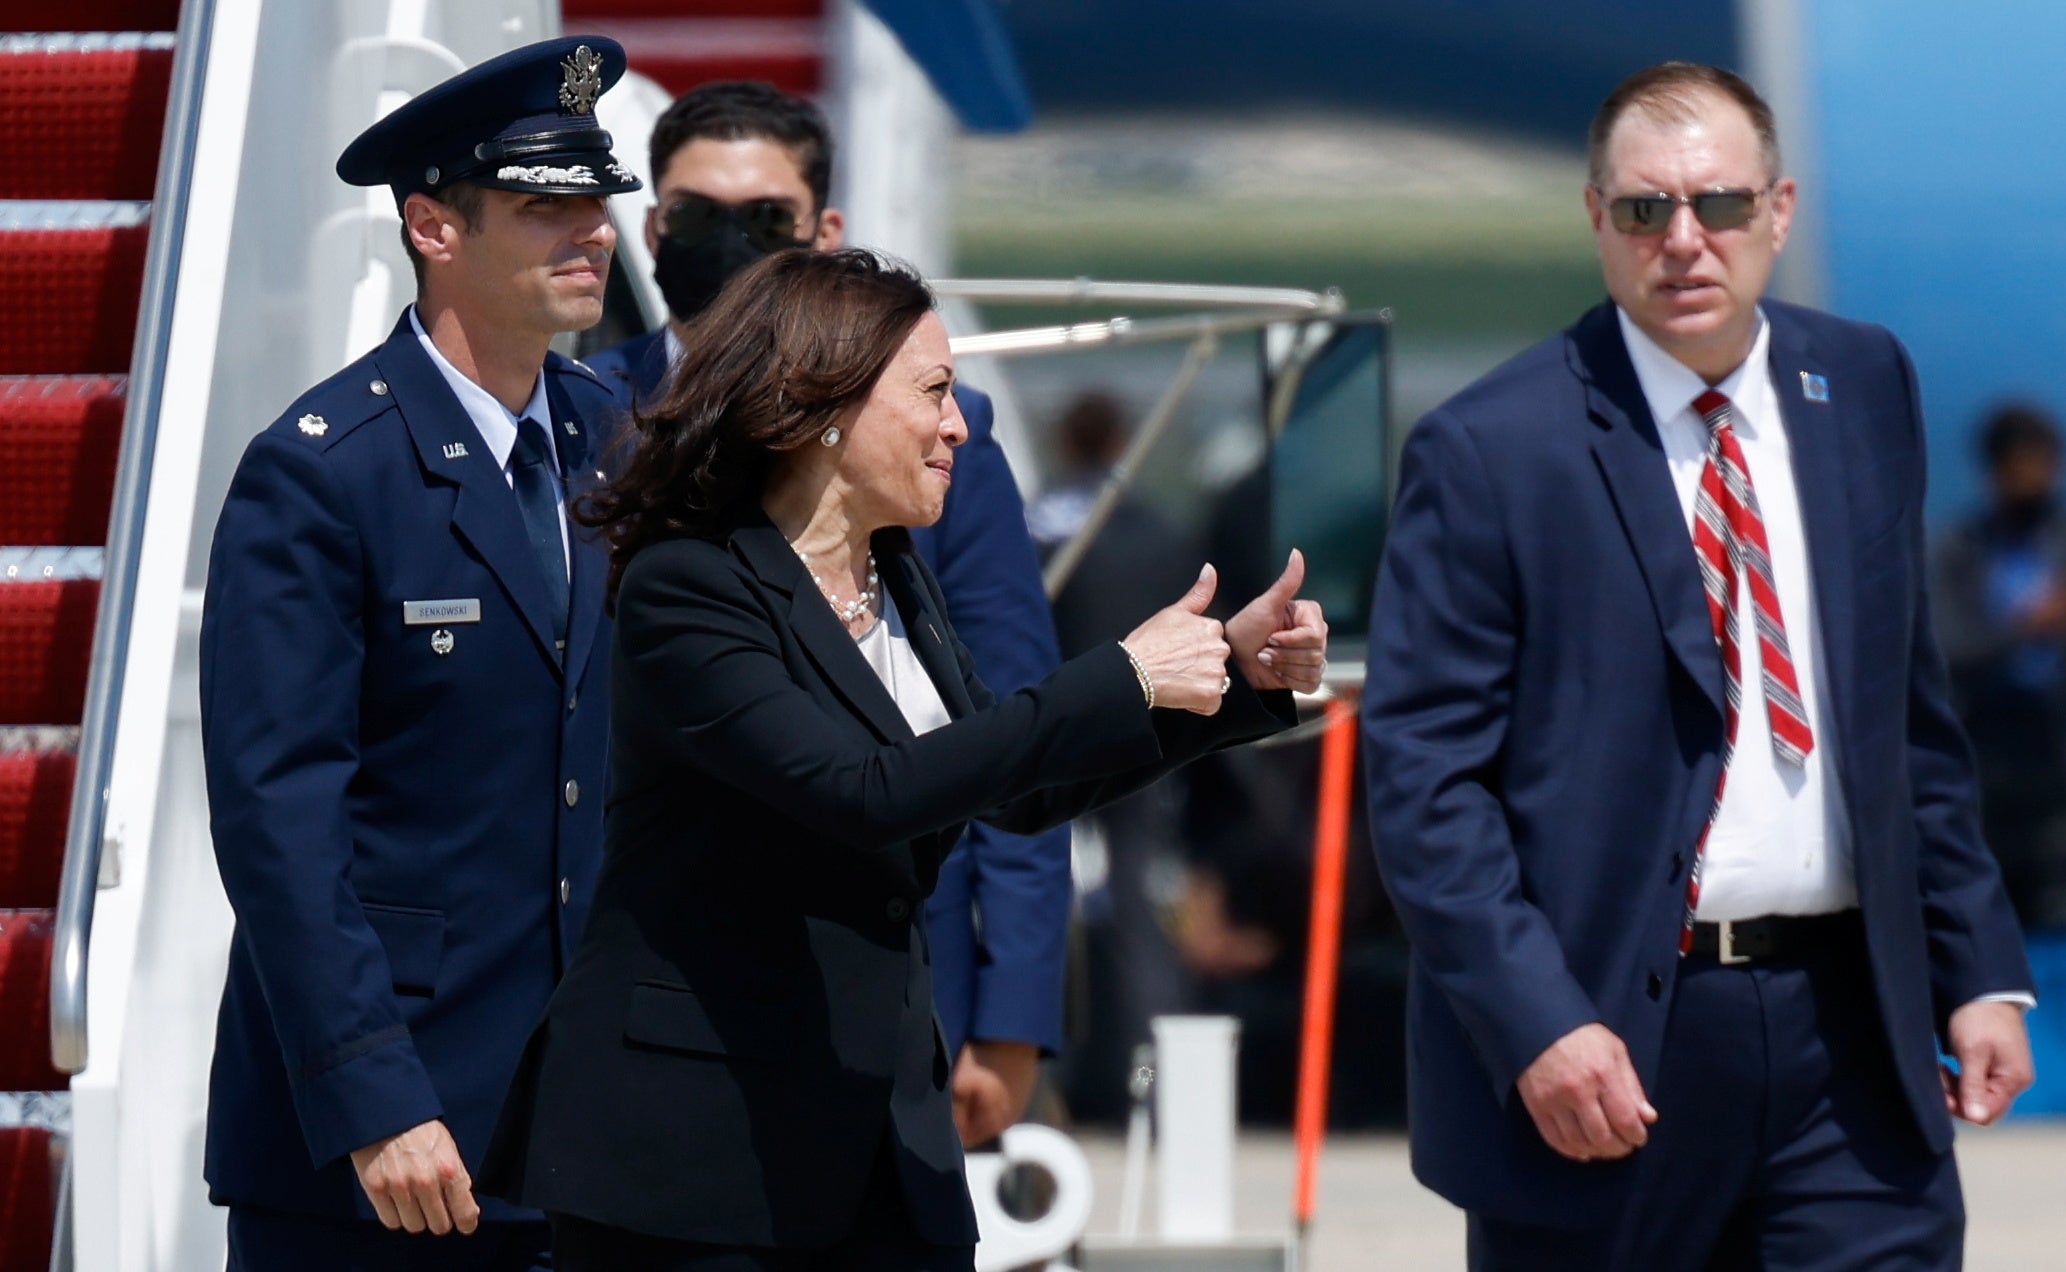 Kamala Harris gives a thumbs-up after her plane was forced to land shortly after take-off